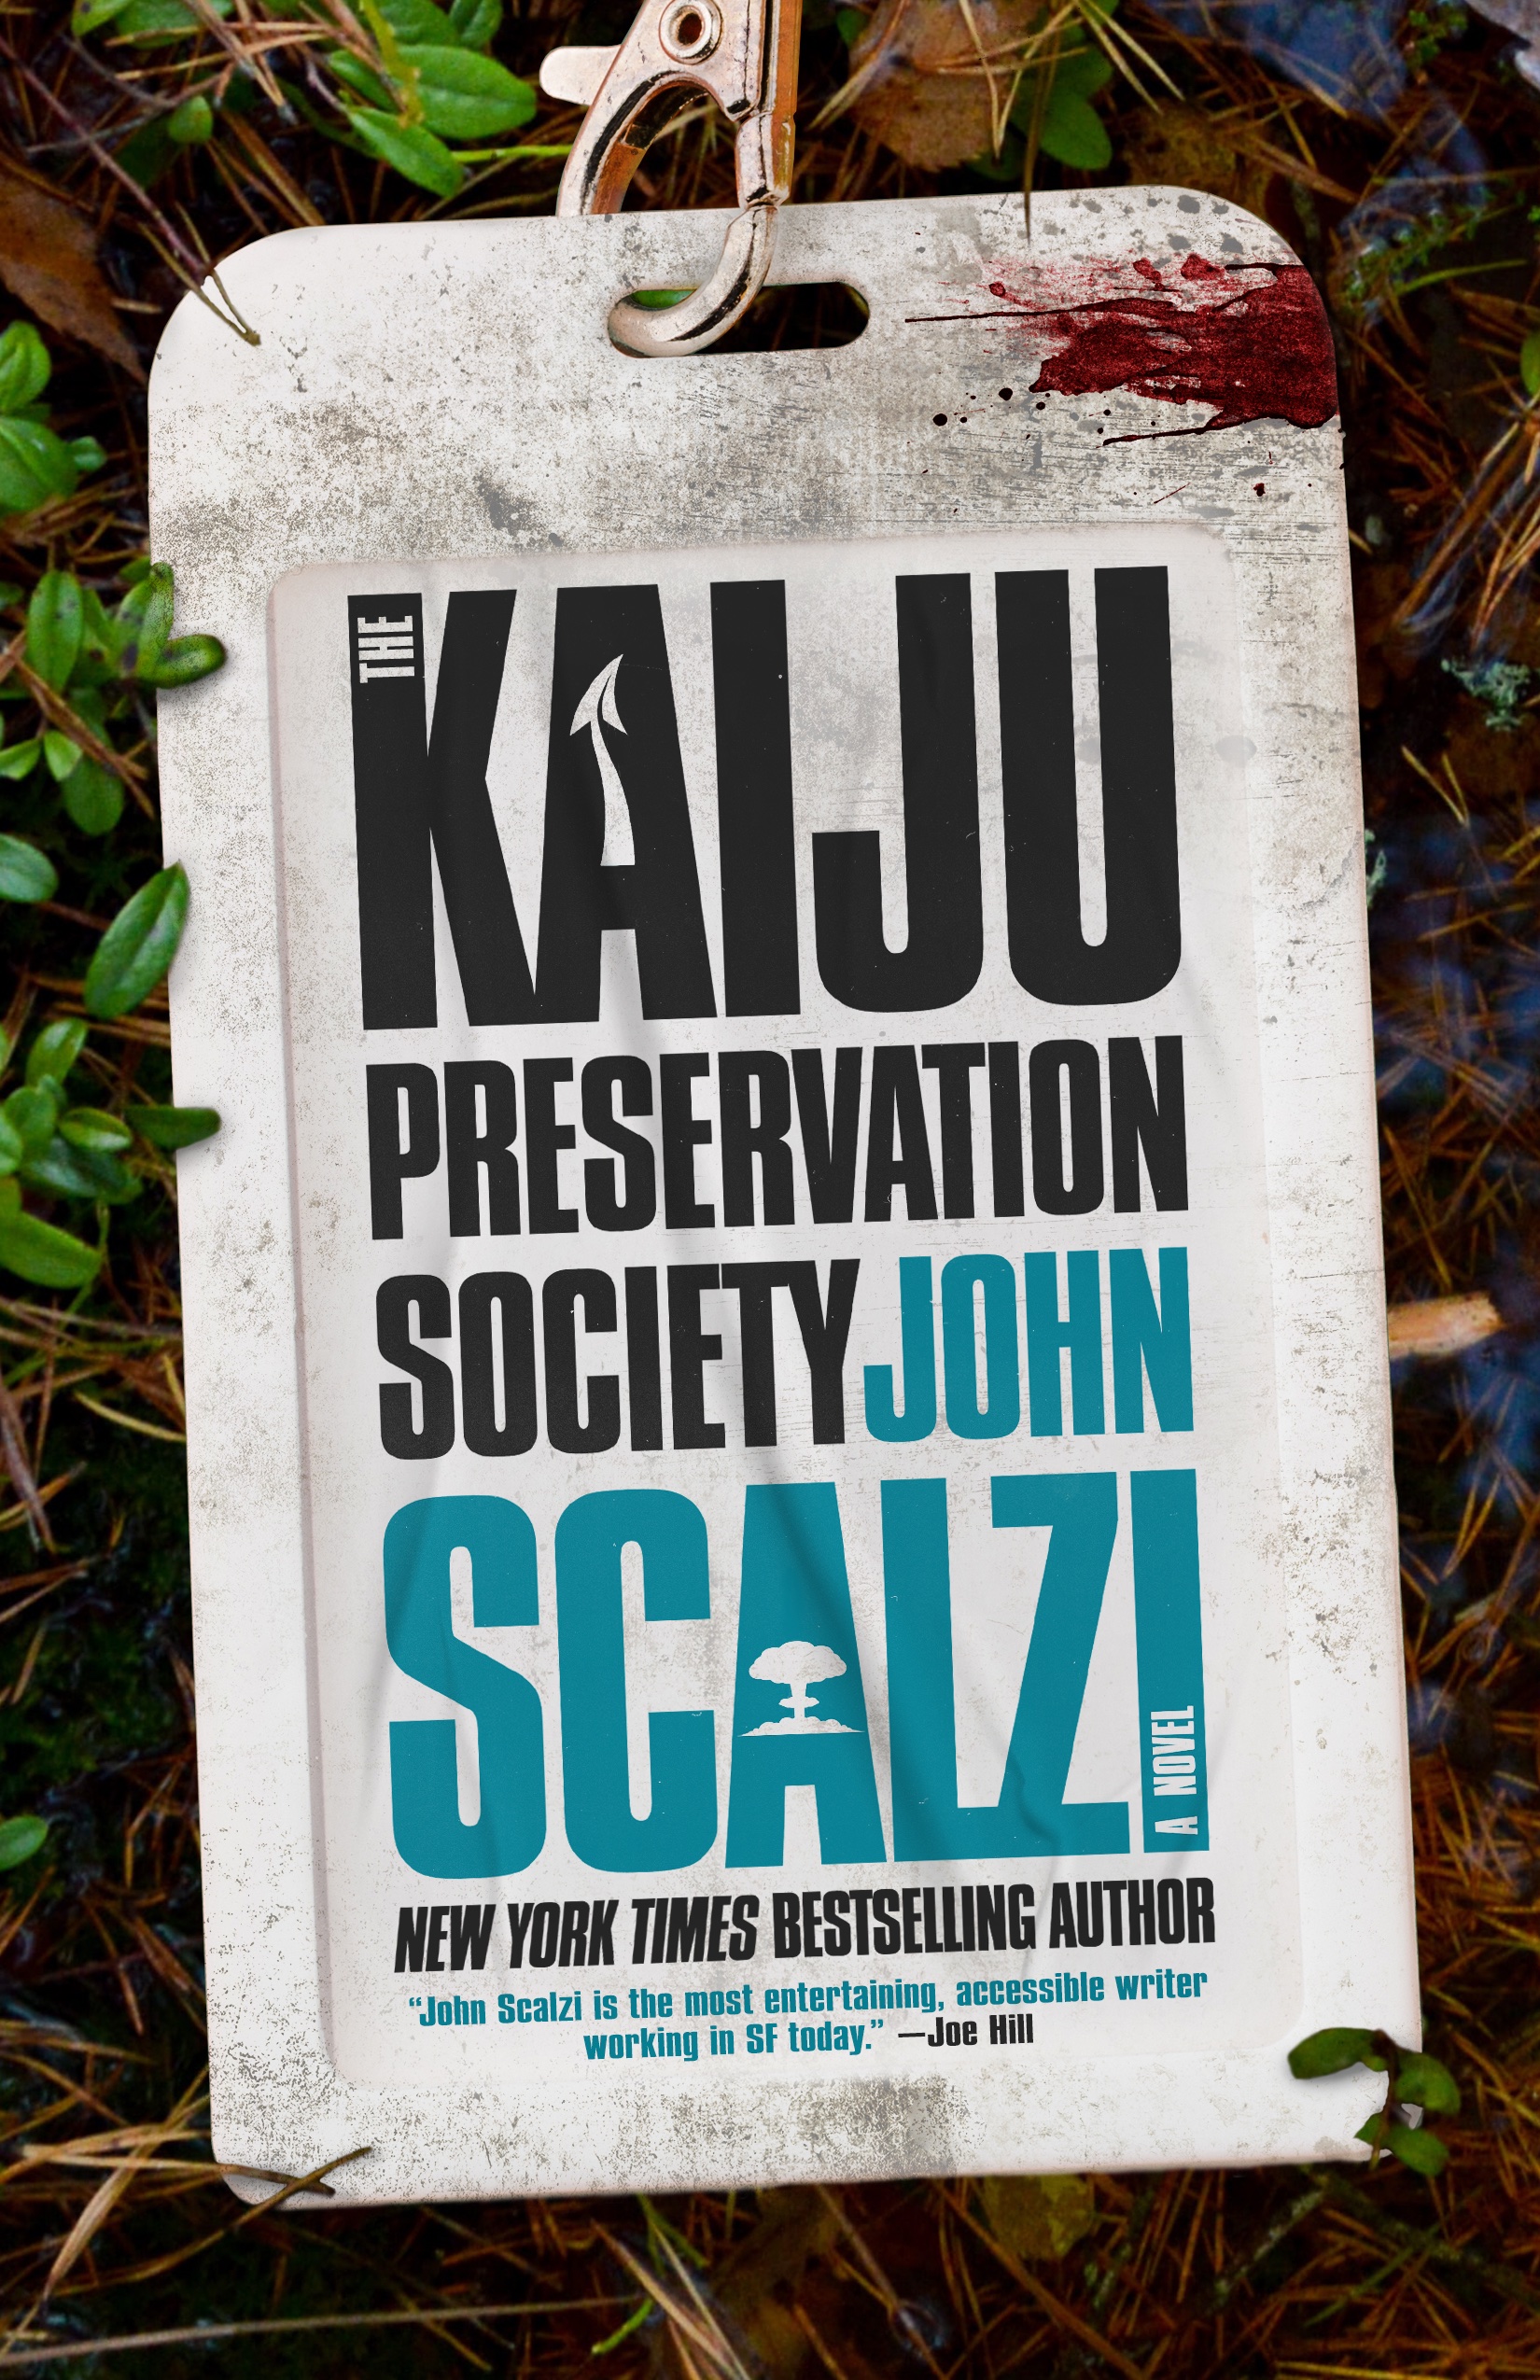 Science Fiction Book Club: "The Kaiju Preservation Society"